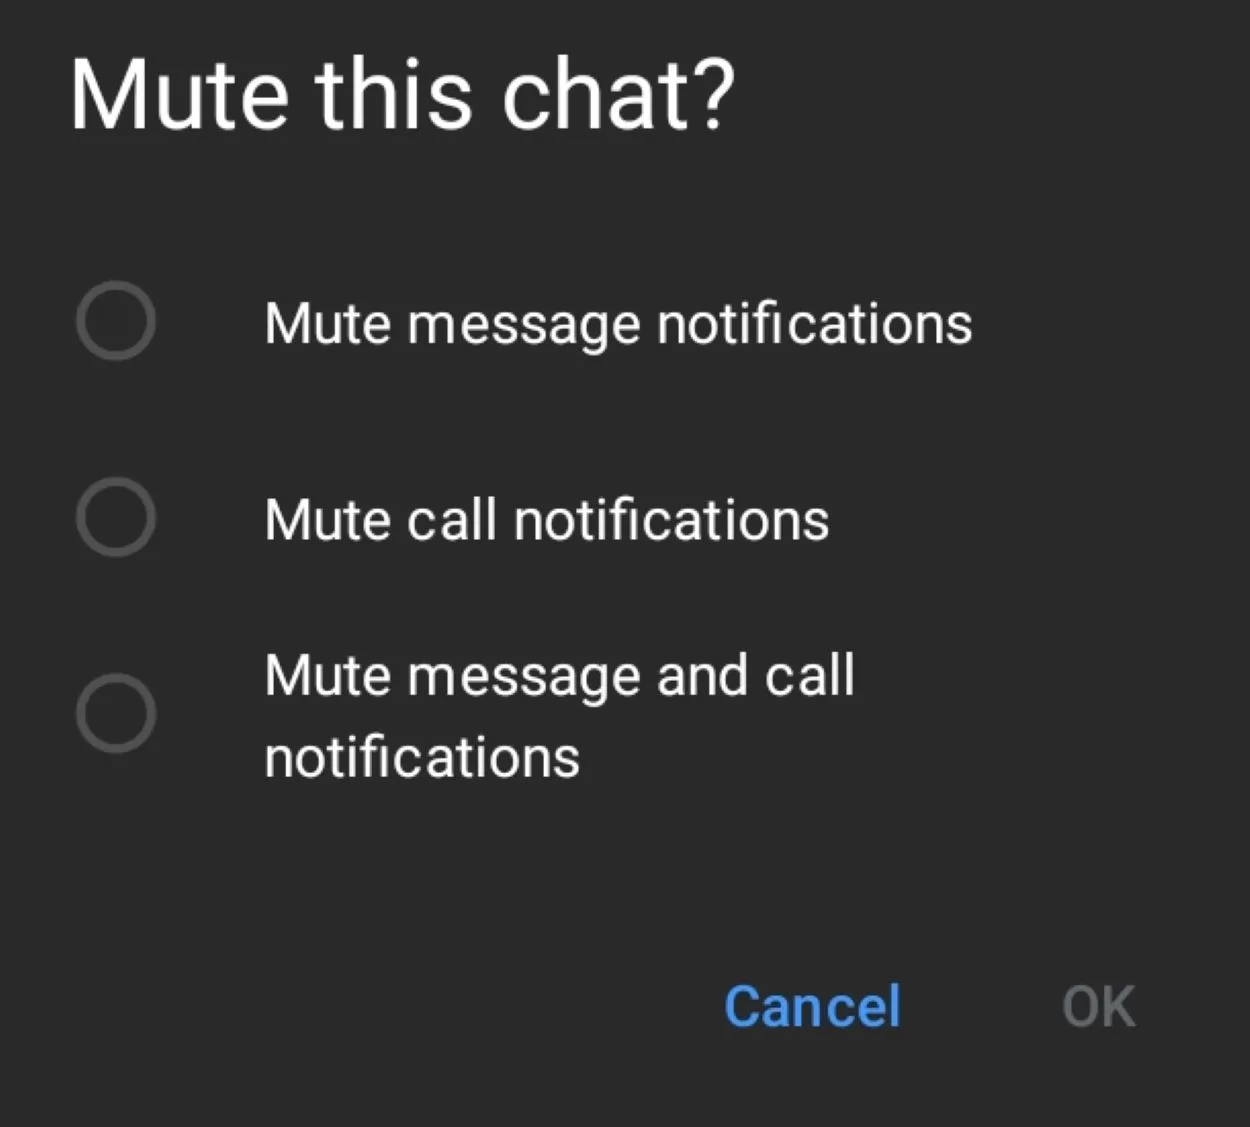 Options to either mute message notifications, call notifications, or both.